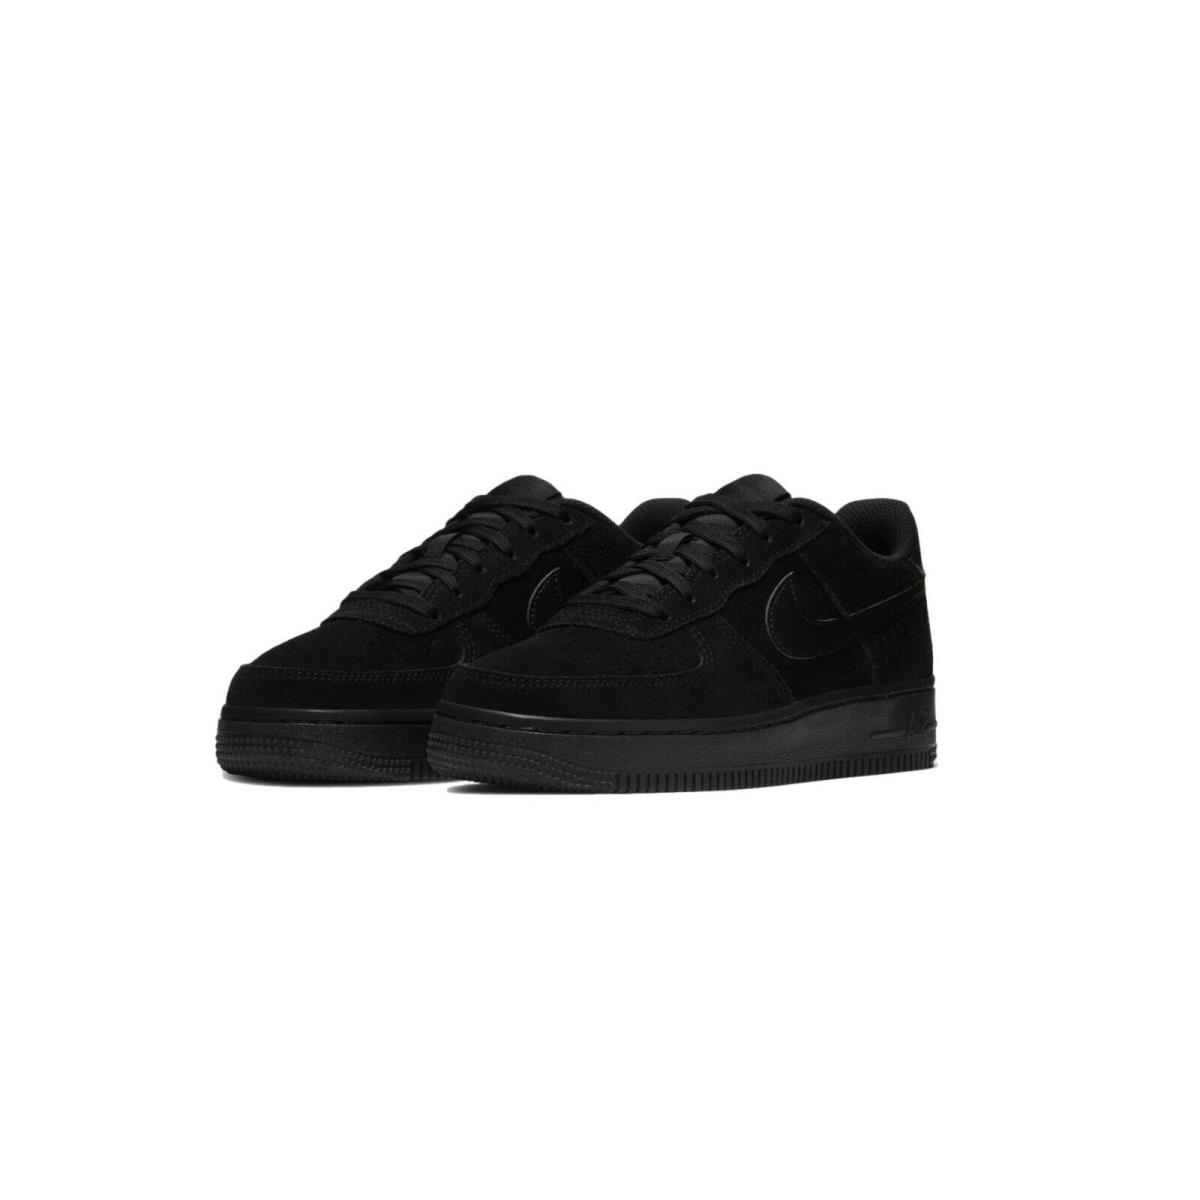 Nike Air Force 1 LV8 3 GS `black` Youth Shoes Sneakers BQ5485-001